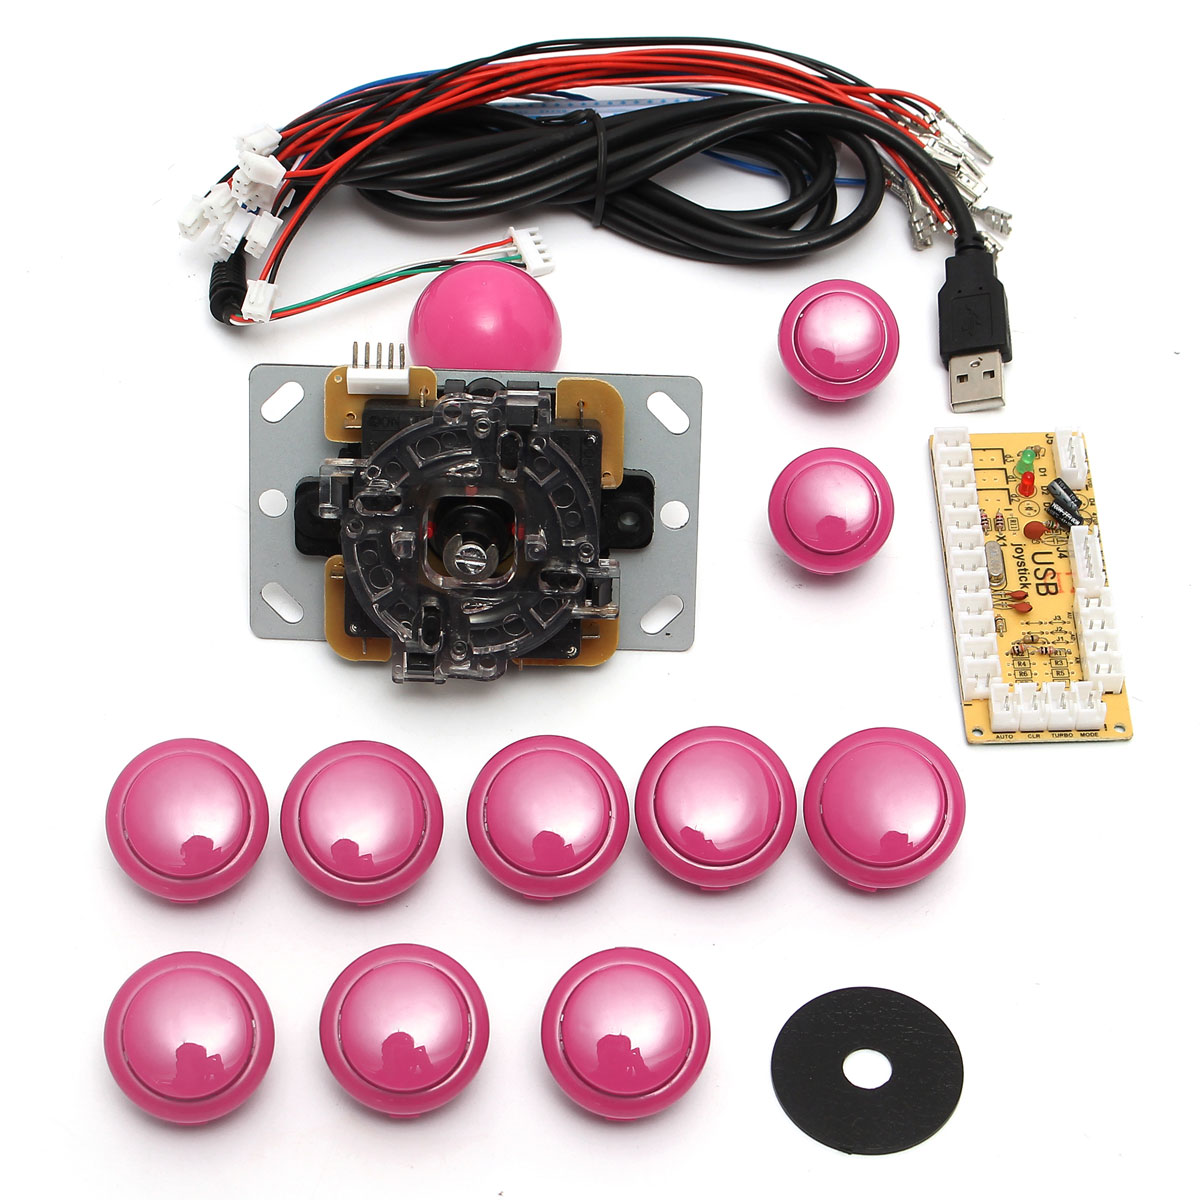 Game DIY Arcade Set Kits Replacement Parts USB Encoder to PC Joystick and Buttons 13